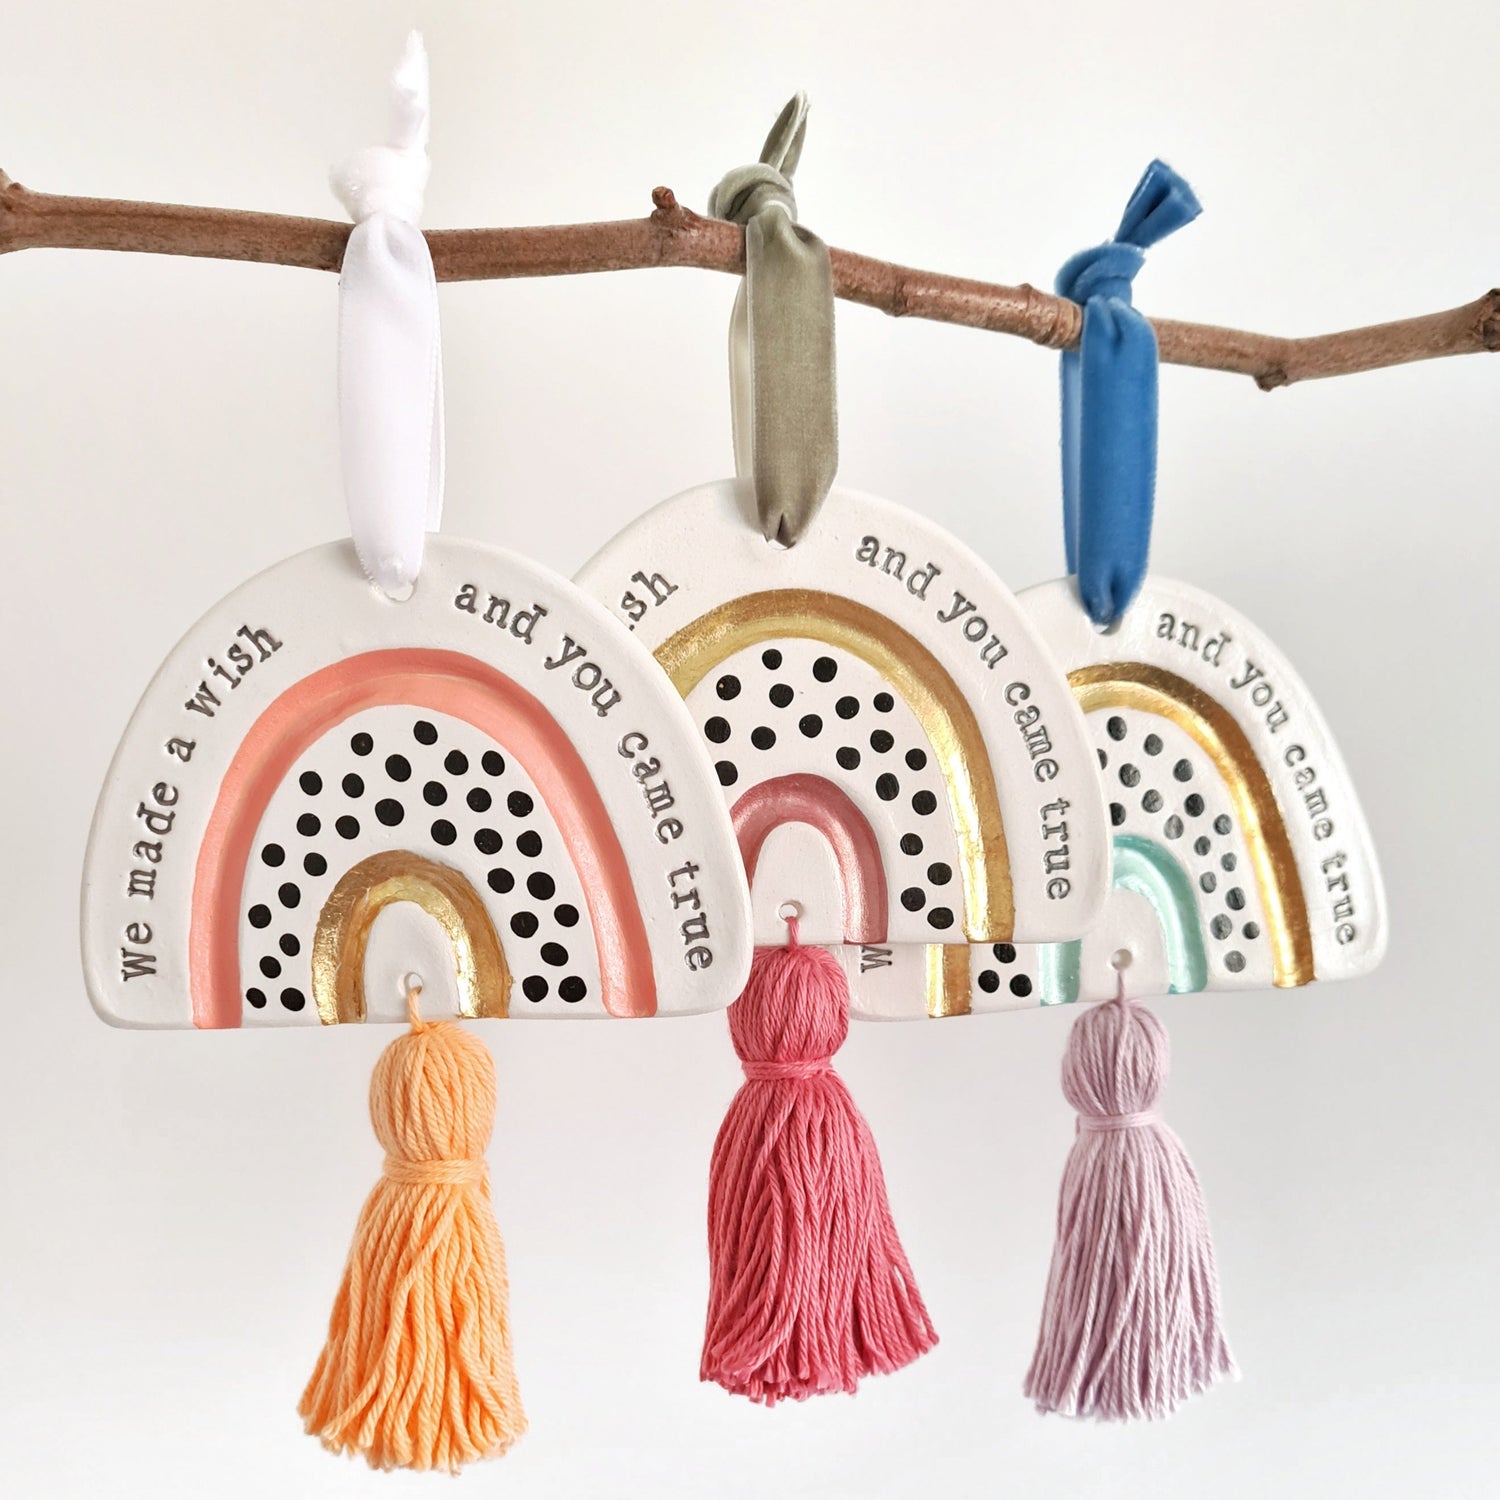 Three rainbows that say 'We made a wish and you came true'. Hung with velvet ribbon, featuring a gold leaf arch and a tassel. 